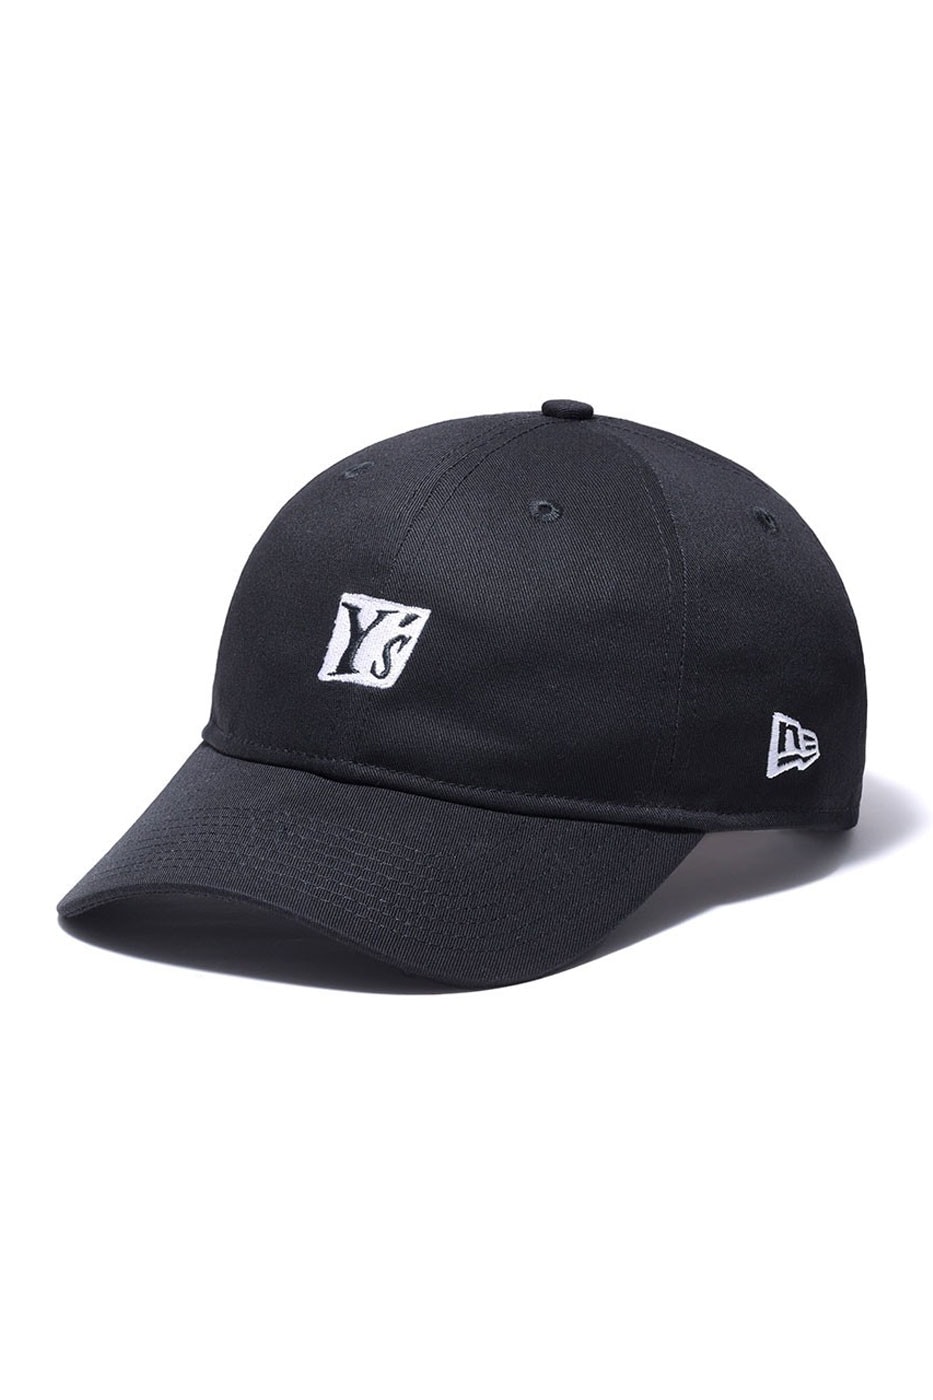 Y's and New Era® Reunite for SS22 Essentials | Hypebeast